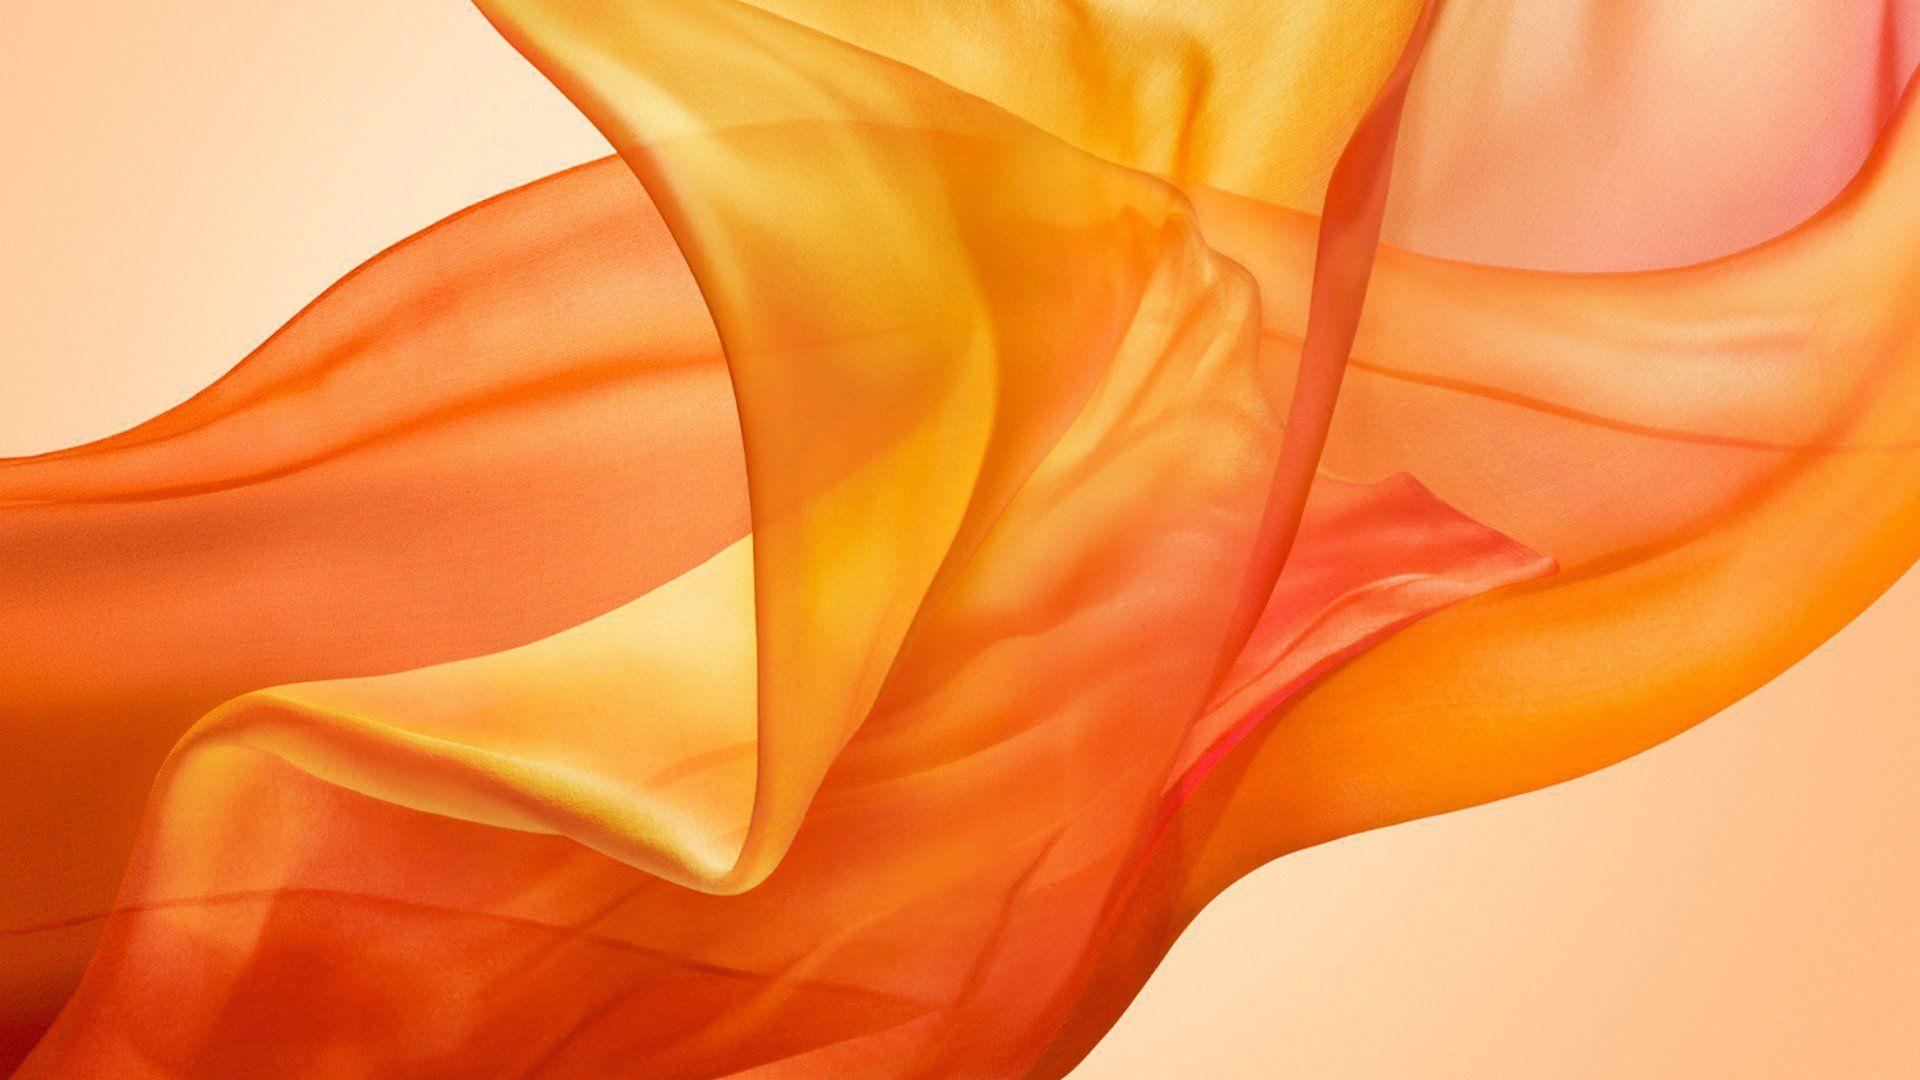 Orange and Gold Wallpapers - Top Free Orange and Gold Backgrounds